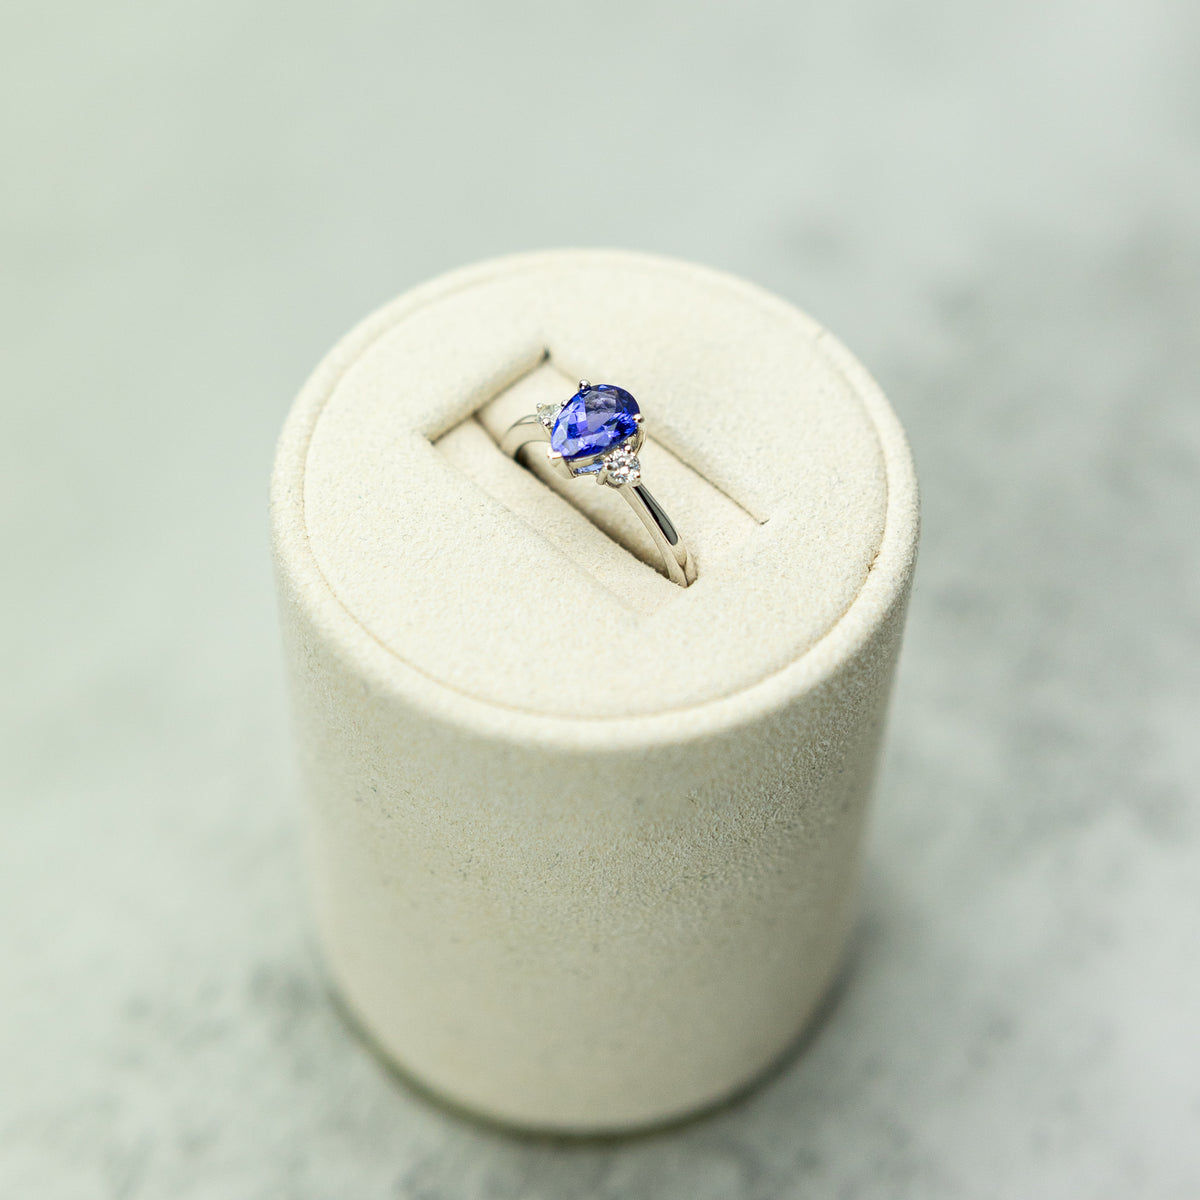 18ct White Gold Pear Cut Tanzanite Ring With Diamond Accents available at RR Jewellers Yarm